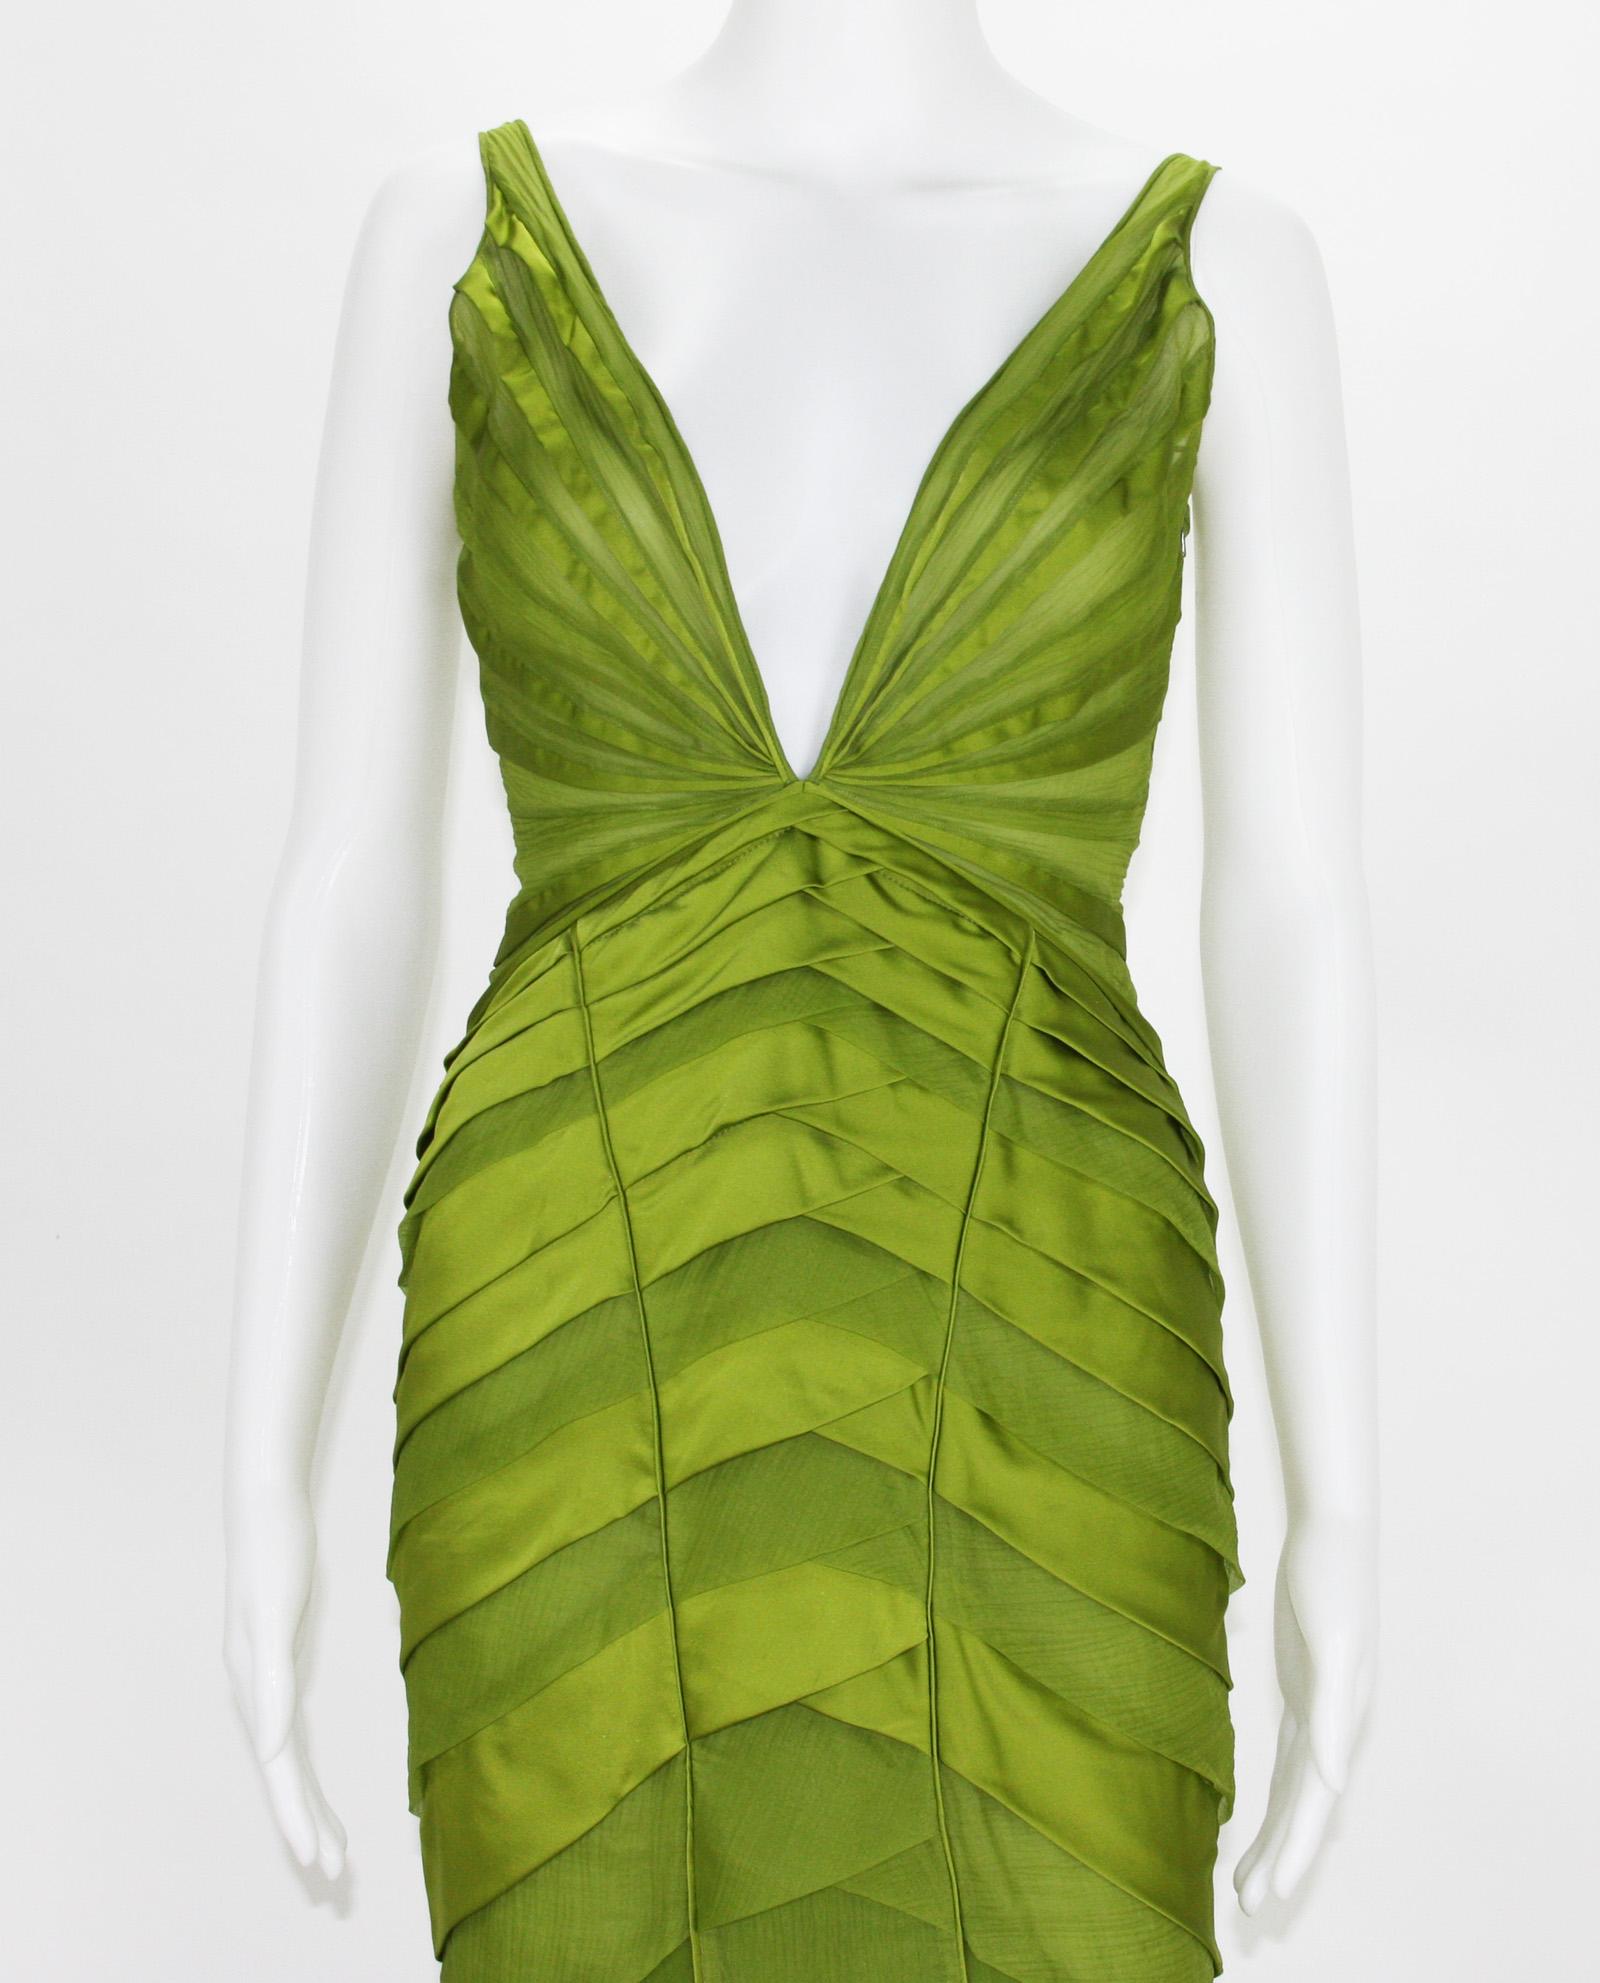 Tom Ford for Gucci 2004 F/W Collection Silk Green Tassel Dress Gown 40 - 4 In Excellent Condition In Montgomery, TX